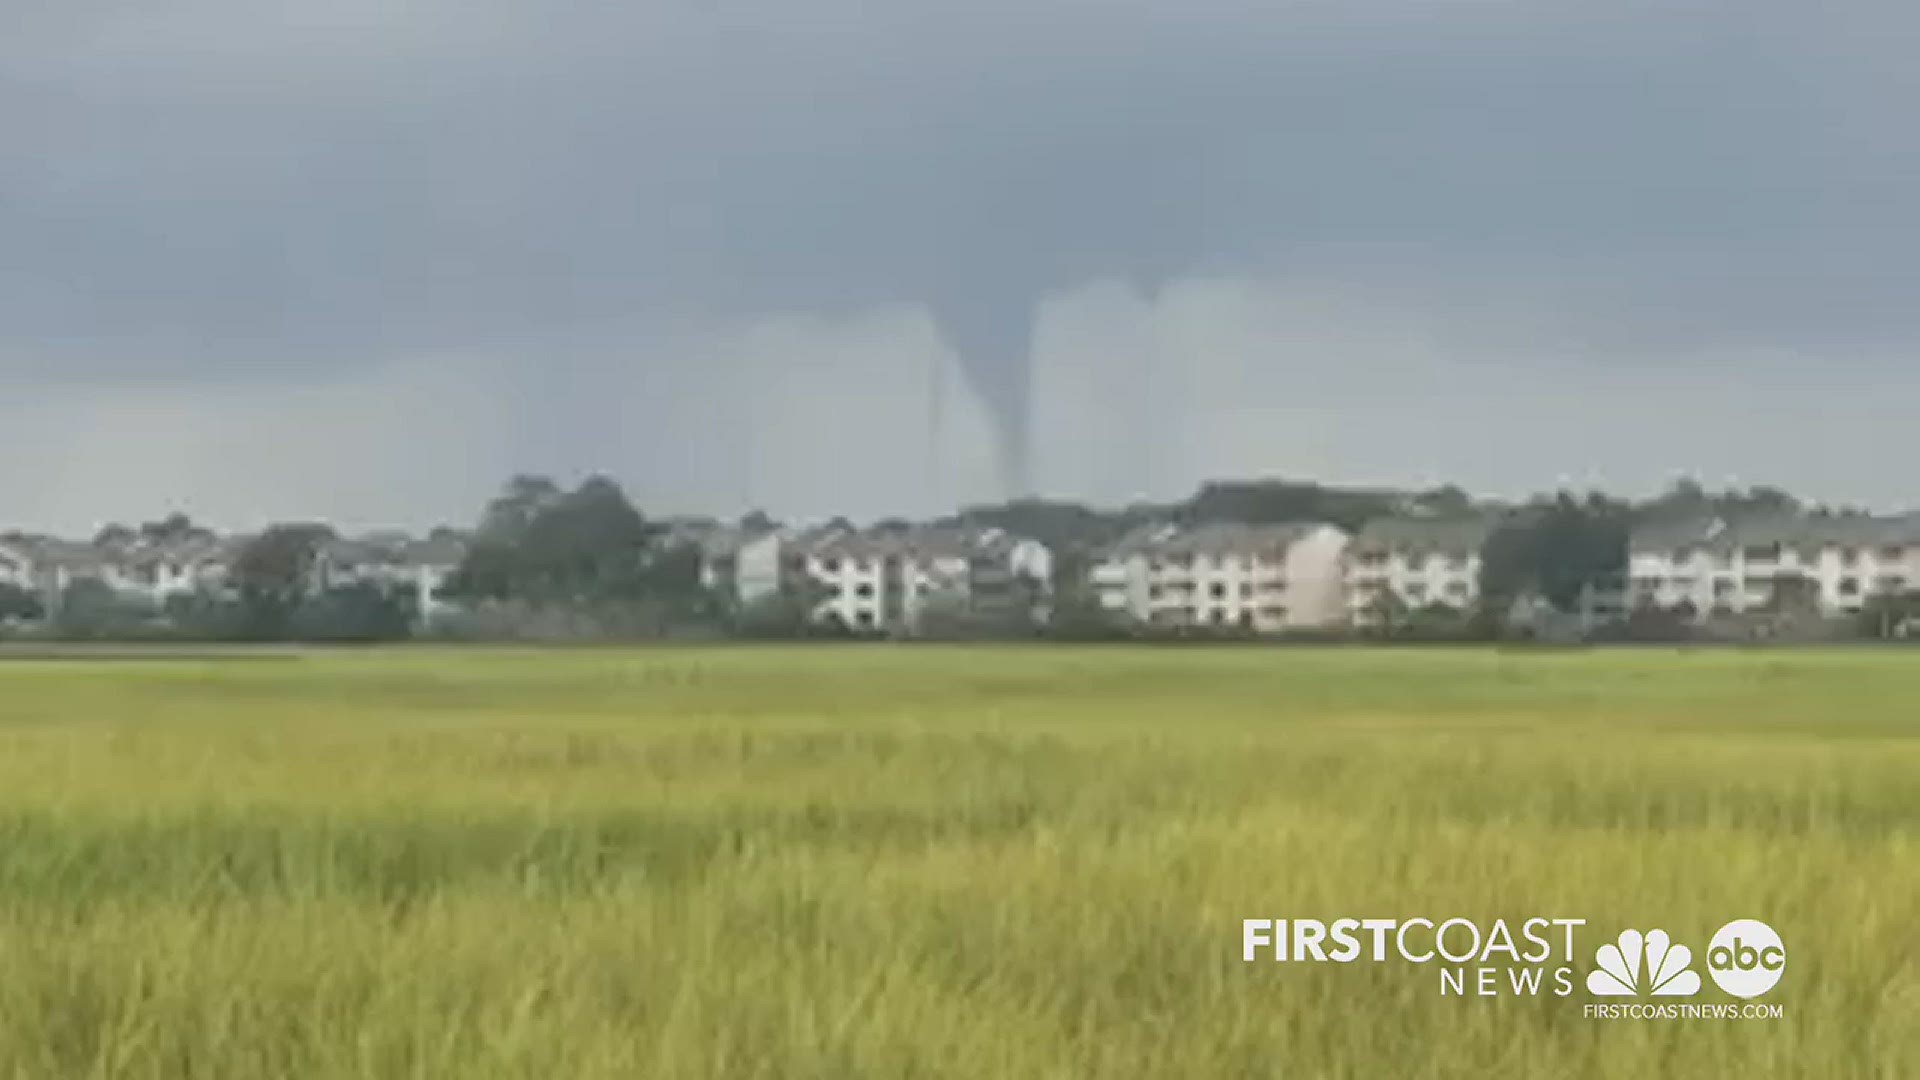 Kate Blackshear shared this waterspout video with us. She shot it on St. Simons Island, GA on Tuesday.